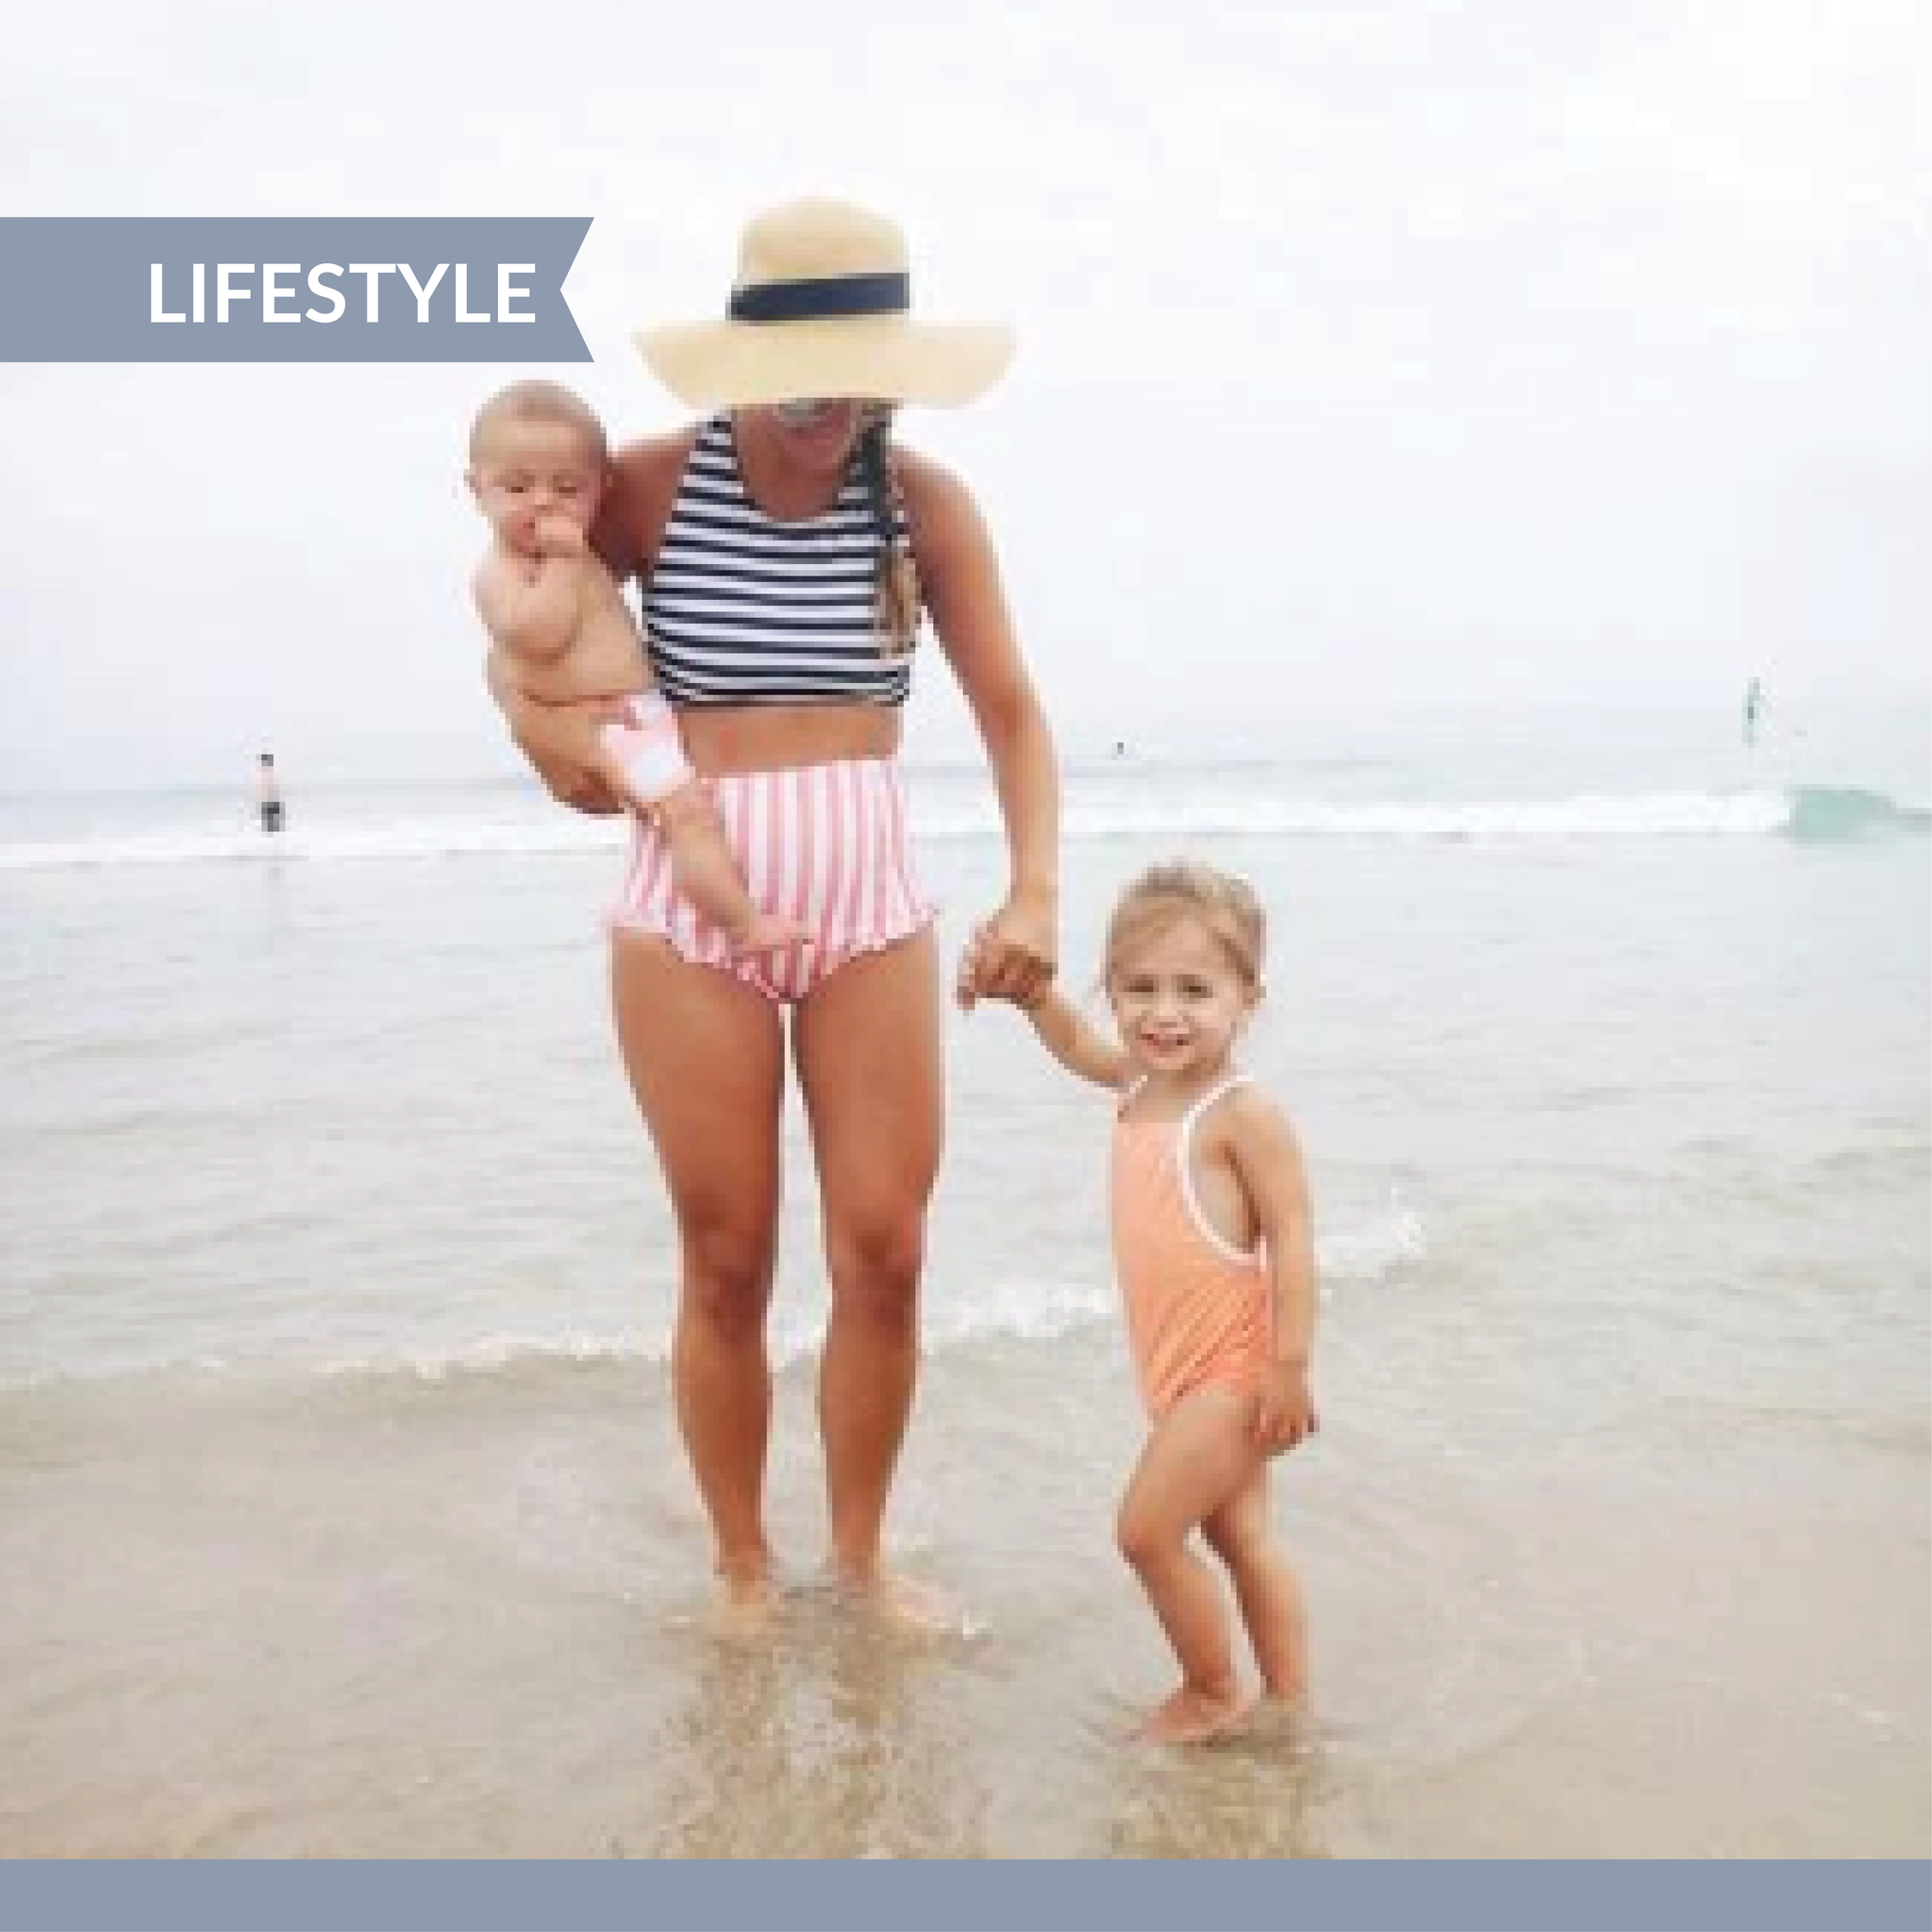 5 tips for surviving baby's 1st beach trip